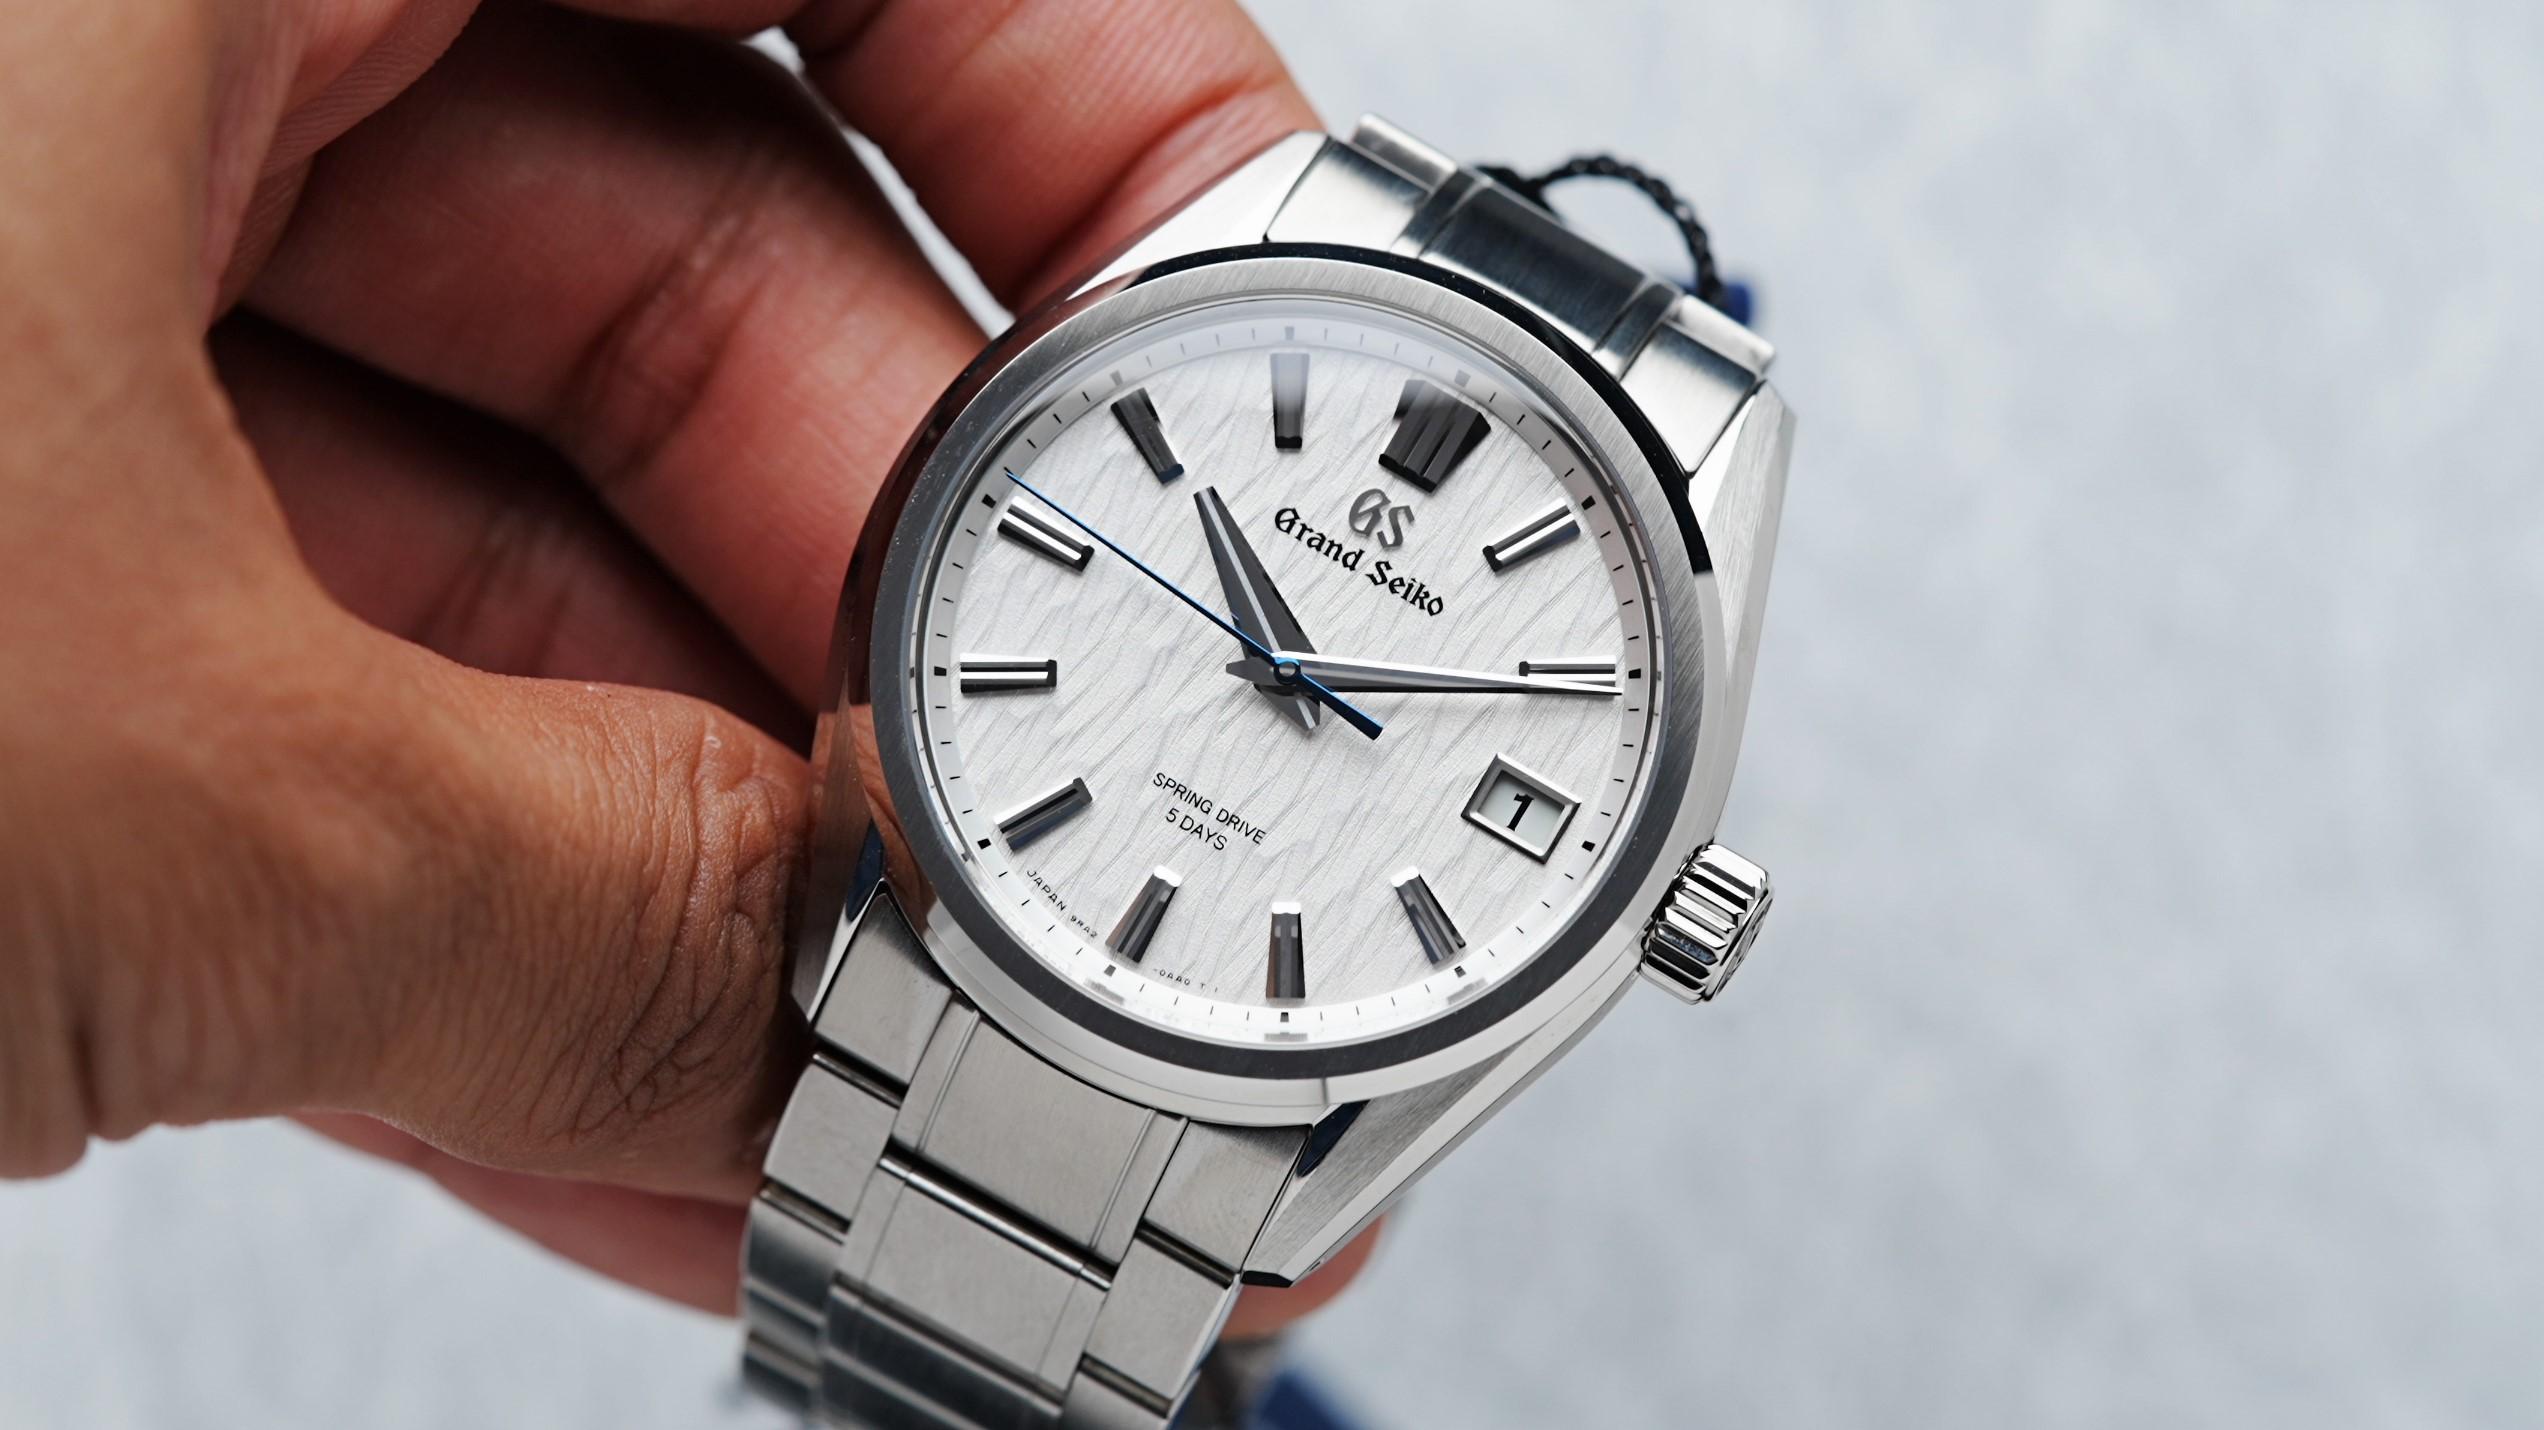 Grand Seiko Spring Drive 9ra2 White Birch being held in hand.